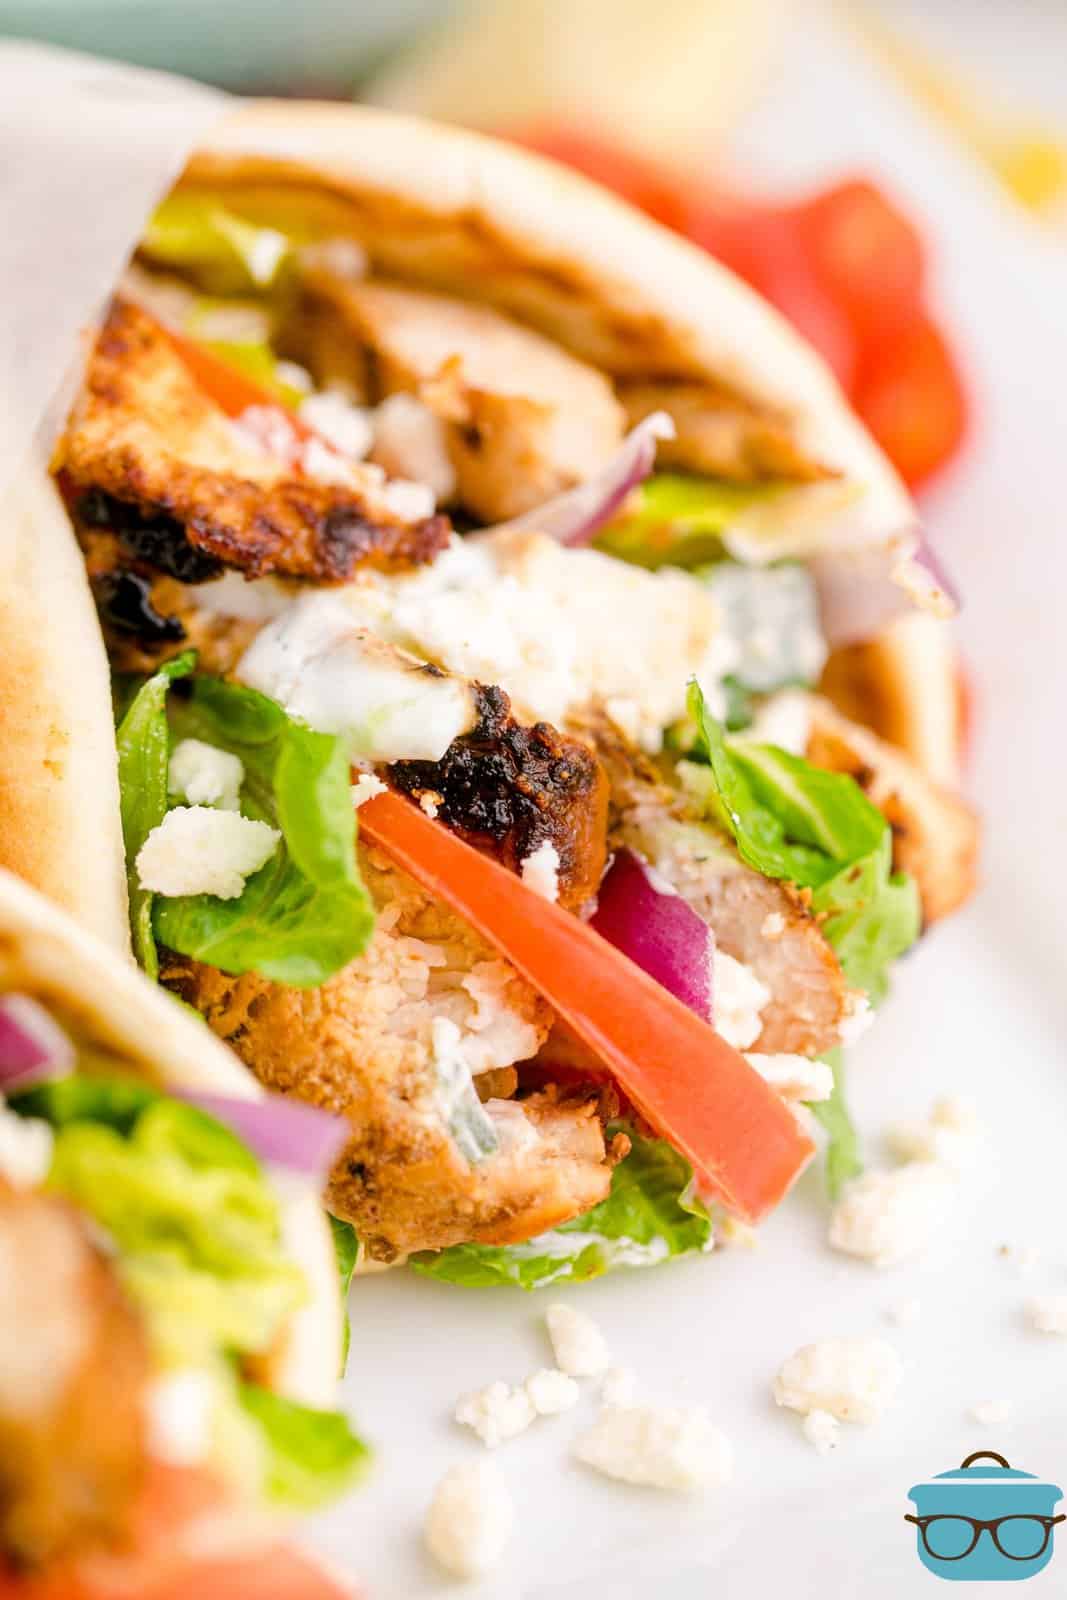 Close up of one of the Chicken Gyros showing the filling ingredients.